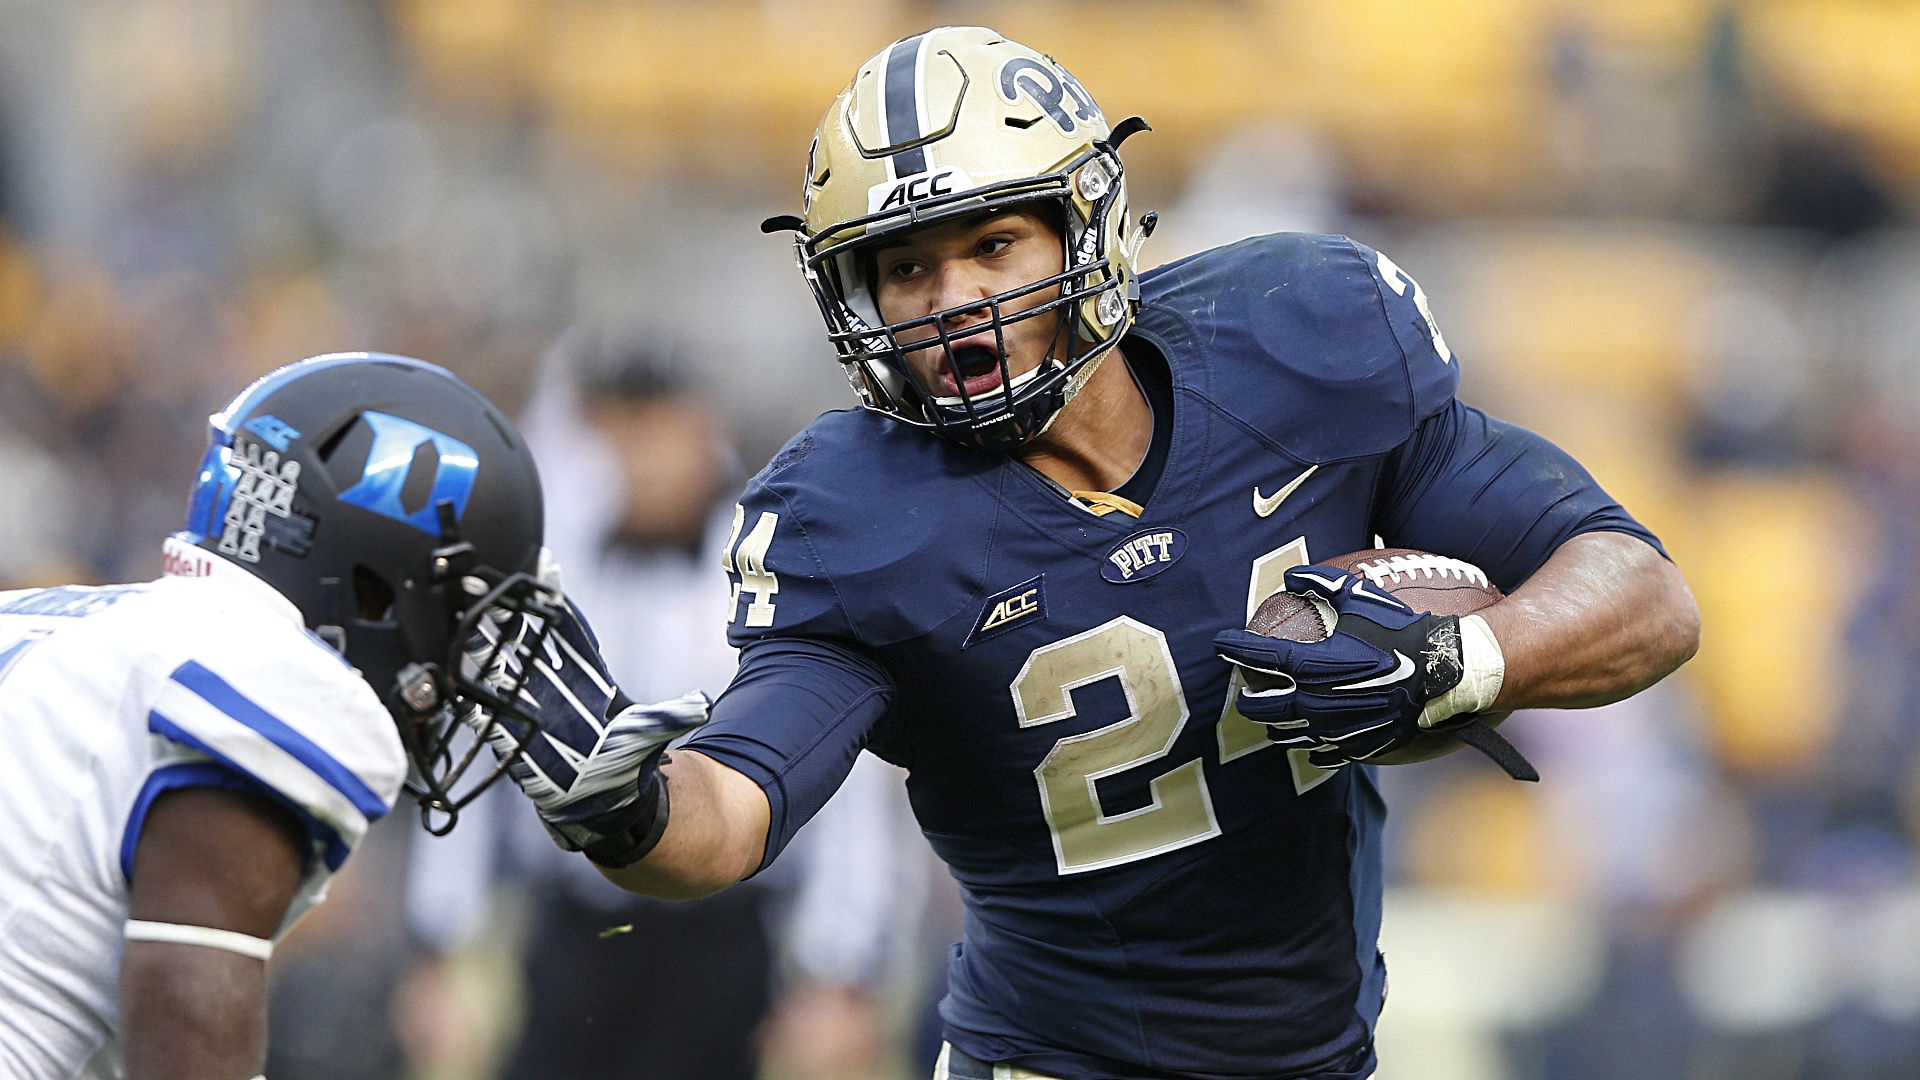 Pitt star RB James Conner diagnosed with cancer; survival rate high